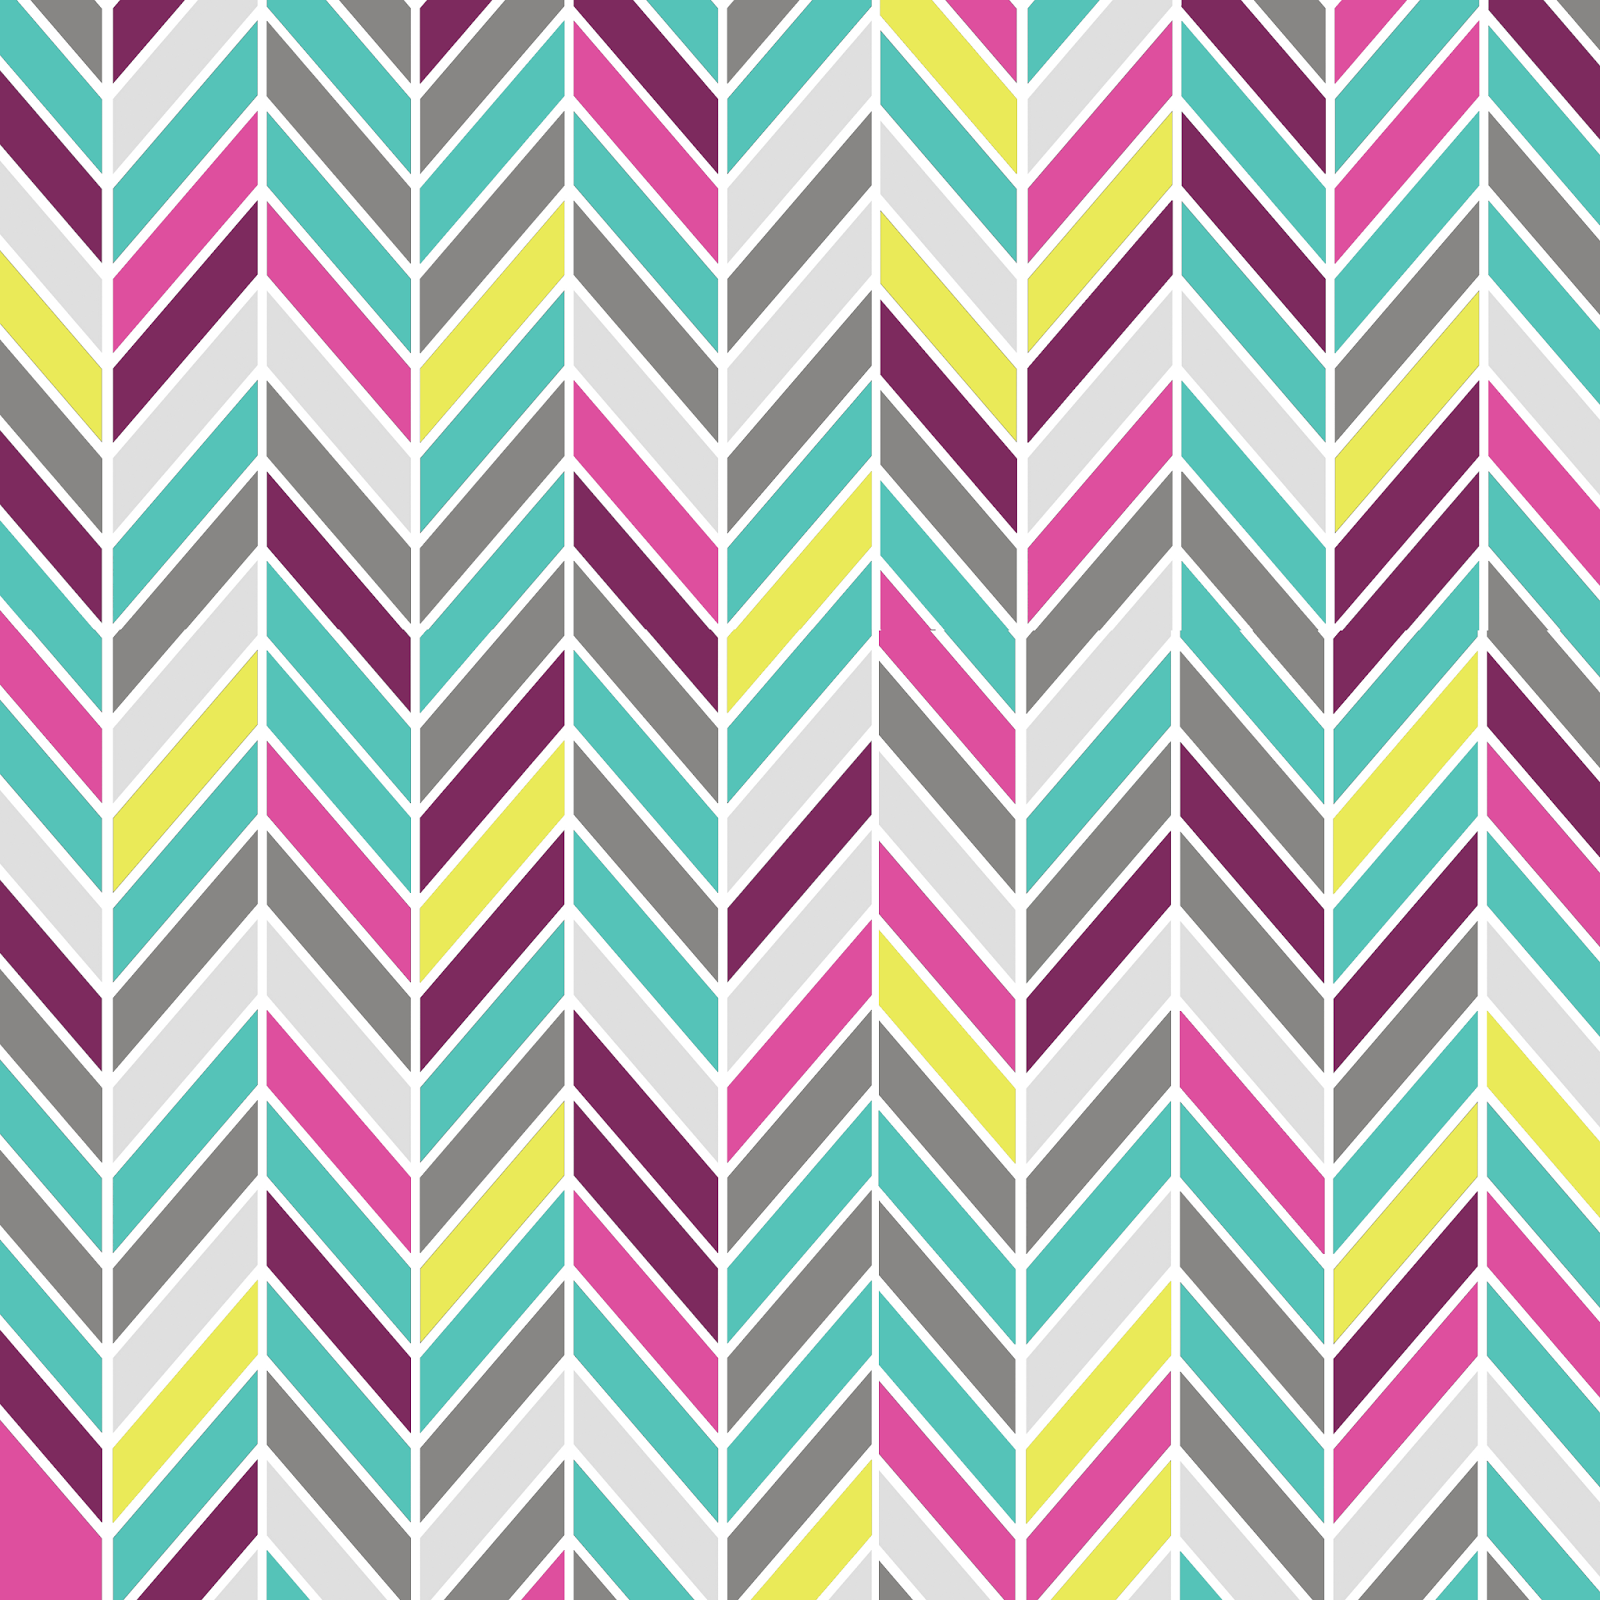 Chevron Pattern Background Teal Image Pictures Becuo